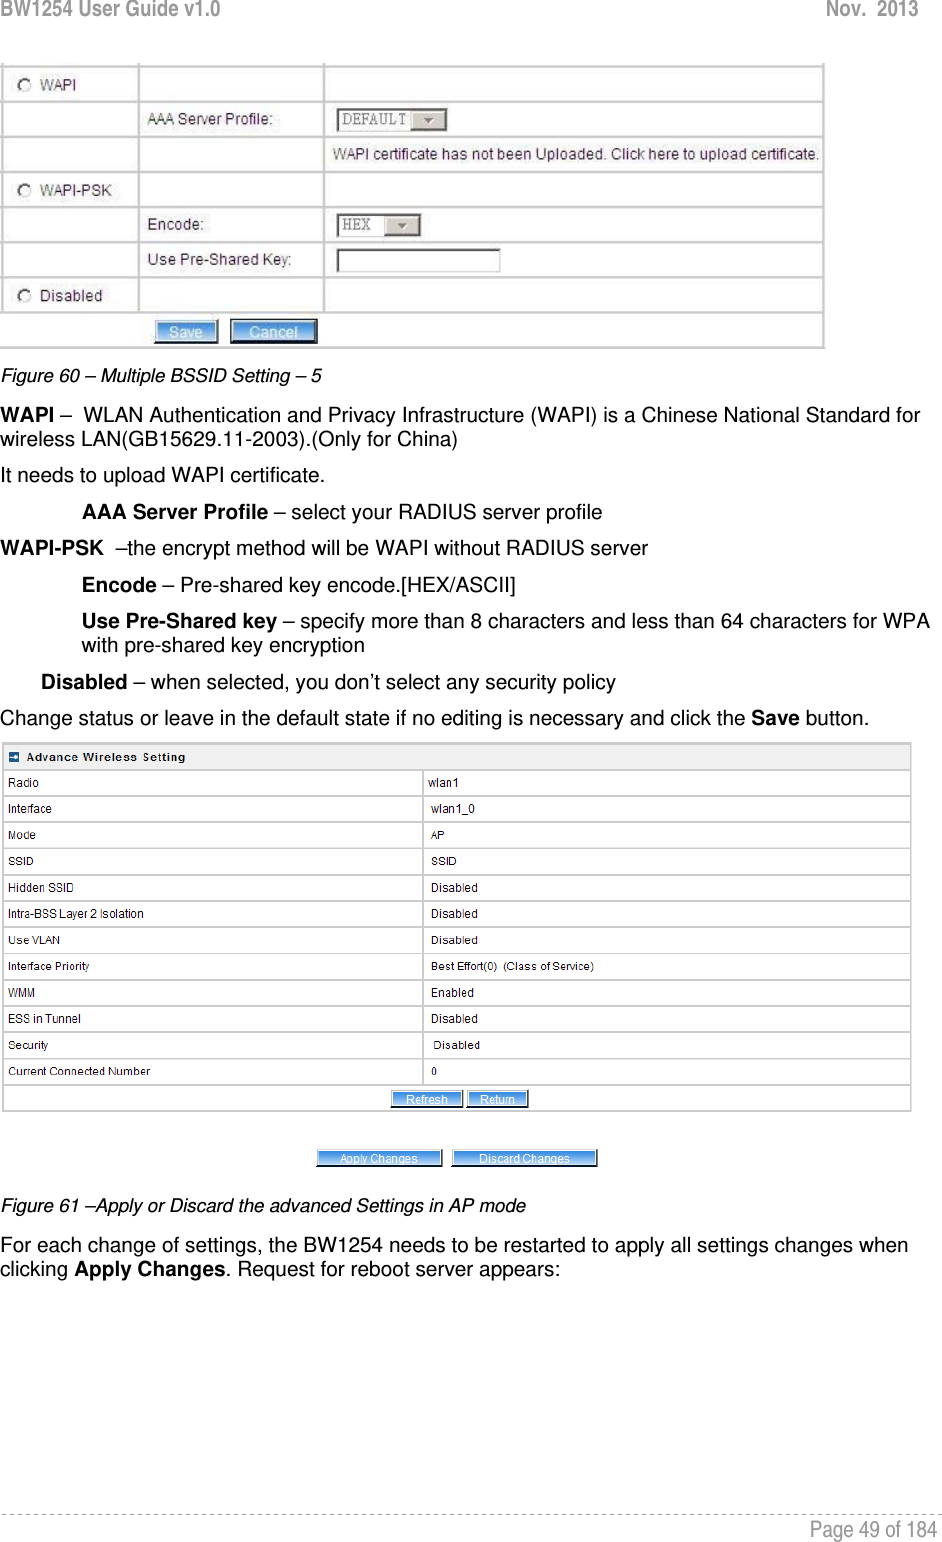 BW1254 User Guide v1.0  Nov.  2013     Page 49 of 184    Figure 60 – Multiple BSSID Setting – 5 WAPI –  WLAN Authentication and Privacy Infrastructure (WAPI) is a Chinese National Standard for wireless LAN(GB15629.11-2003).(Only for China) It needs to upload WAPI certificate. AAA Server Profile – select your RADIUS server profile WAPI-PSK  –the encrypt method will be WAPI without RADIUS server Encode – Pre-shared key encode.[HEX/ASCII] Use Pre-Shared key – specify more than 8 characters and less than 64 characters for WPA with pre-shared key encryption Disabled – when selected, you don’t select any security policy Change status or leave in the default state if no editing is necessary and click the Save button.   Figure 61 –Apply or Discard the advanced Settings in AP mode For each change of settings, the BW1254 needs to be restarted to apply all settings changes when clicking Apply Changes. Request for reboot server appears: 